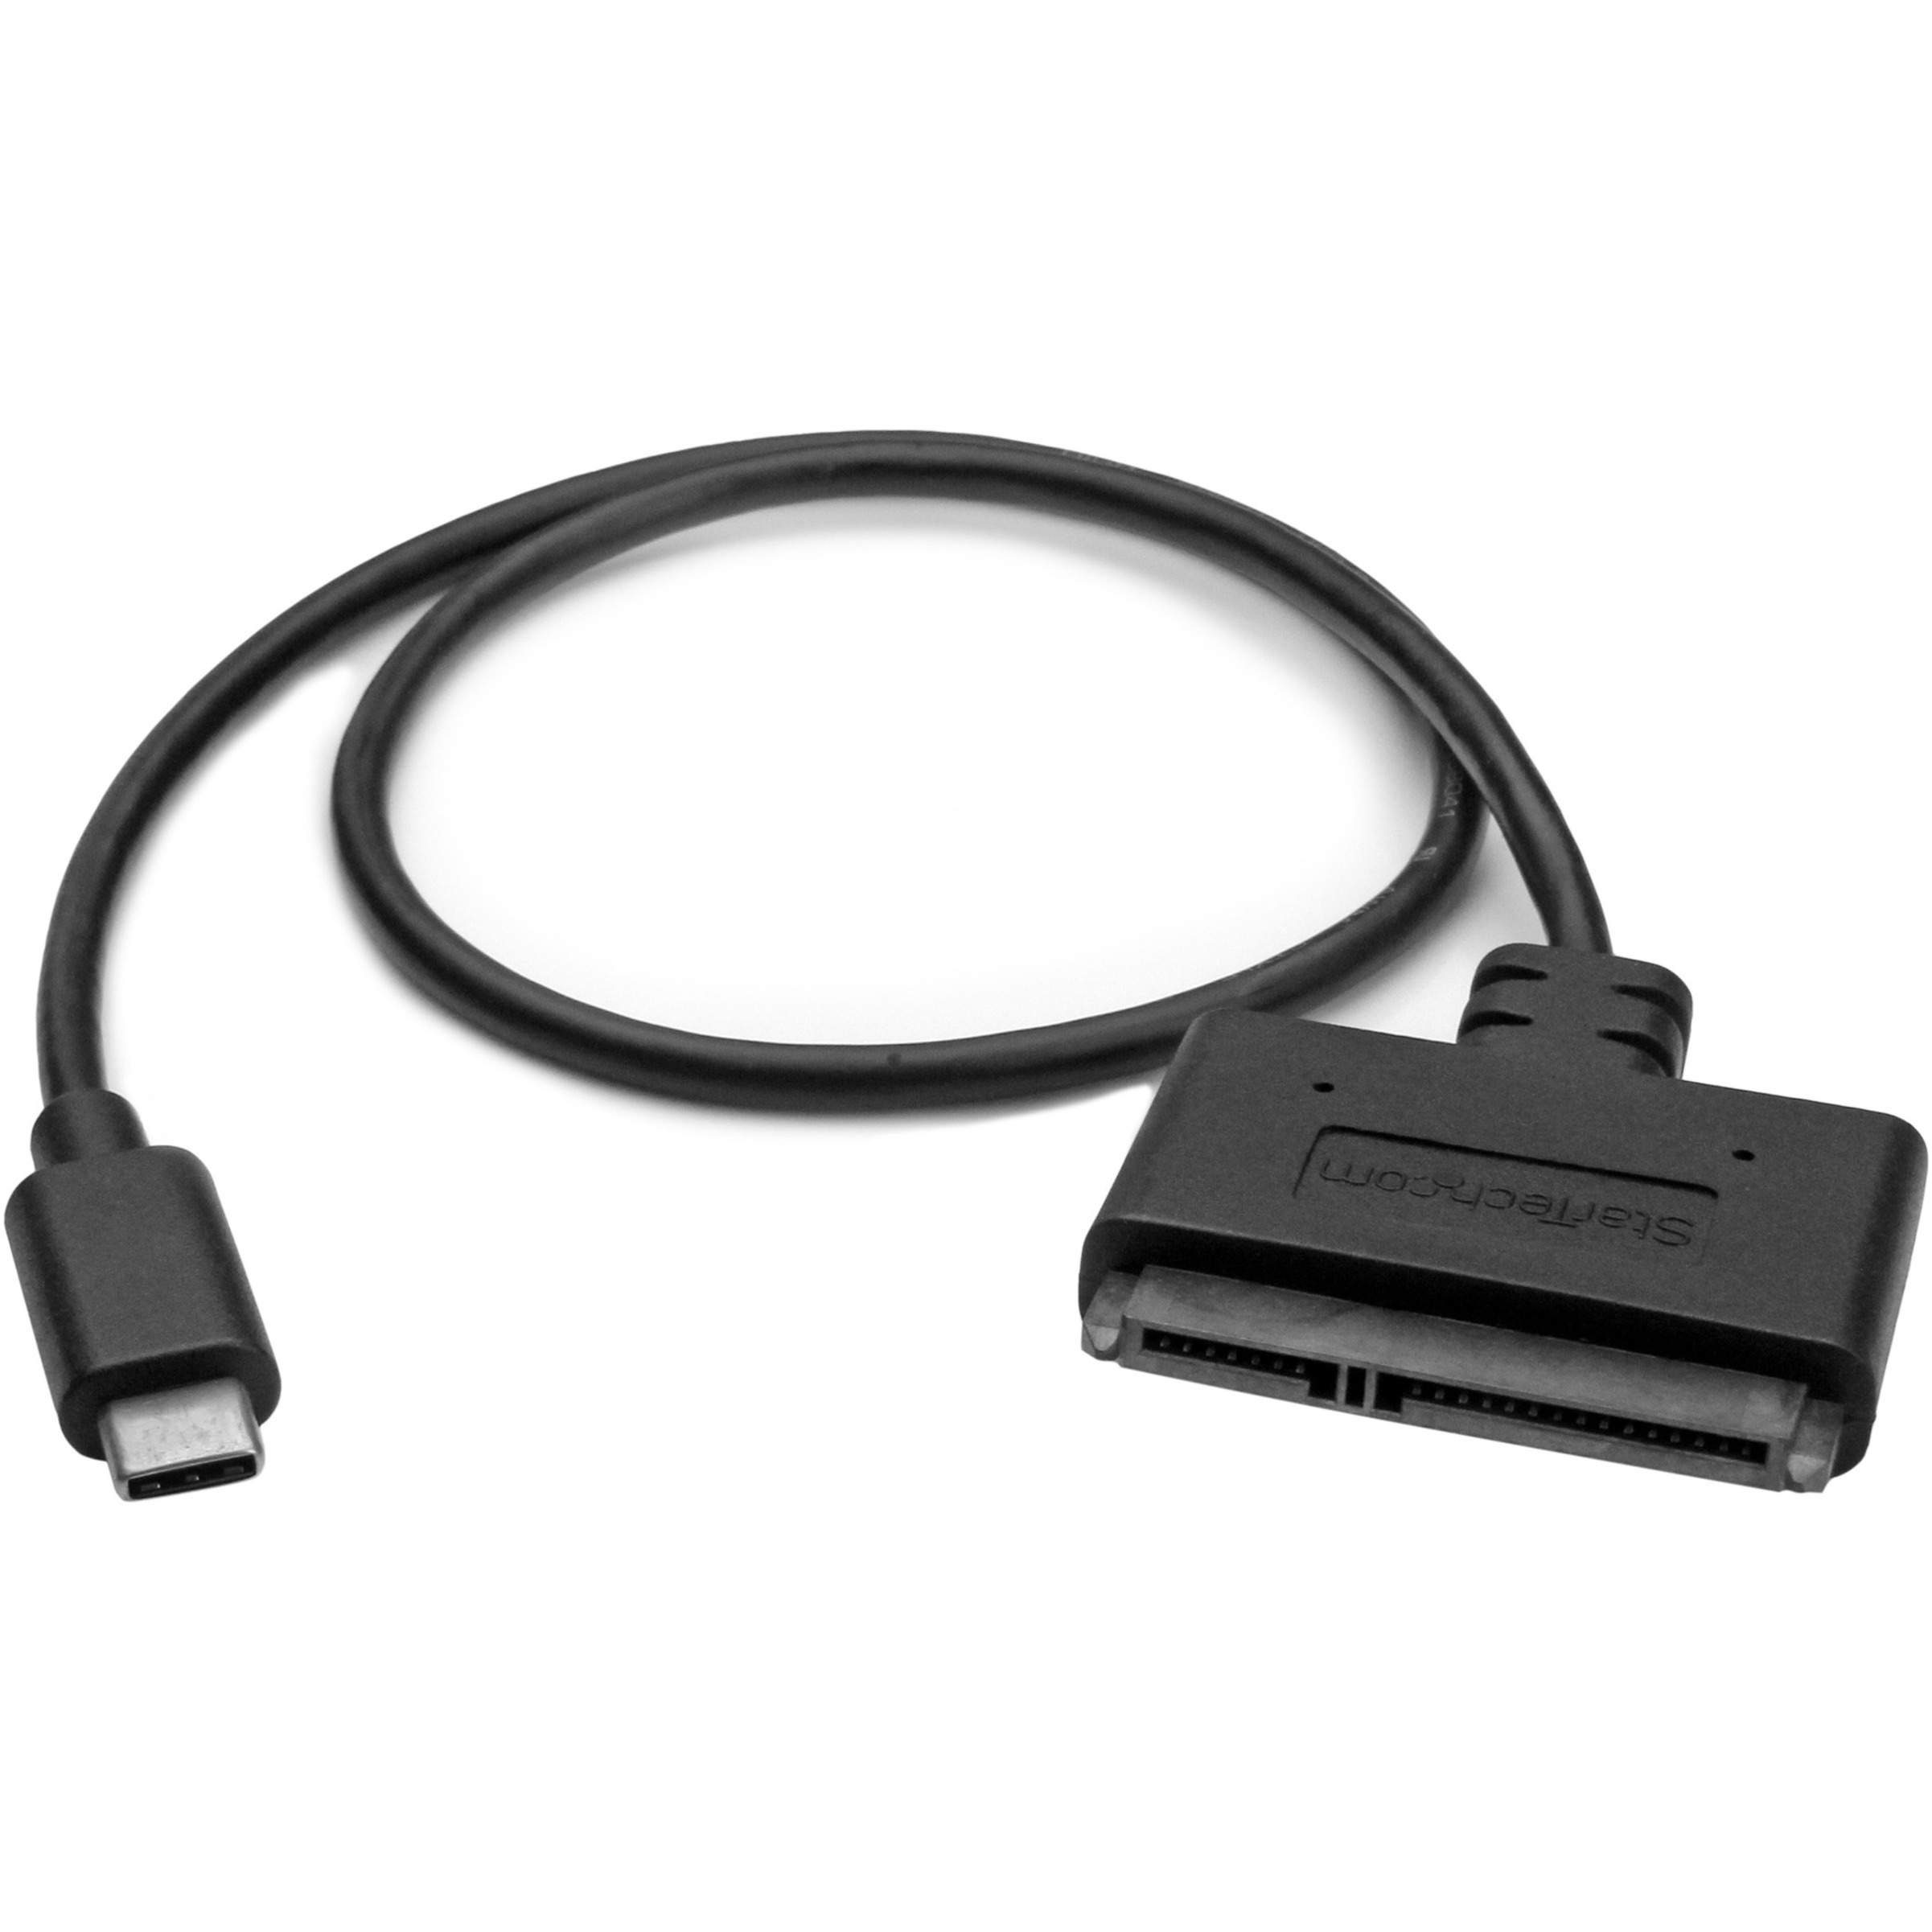 StarTech.com USB C to SATA Adapter - External Hard Drive Connector for 2.5'' SATA Drives - SATA SSD / HDD to USB C Cable - image 1 of 8